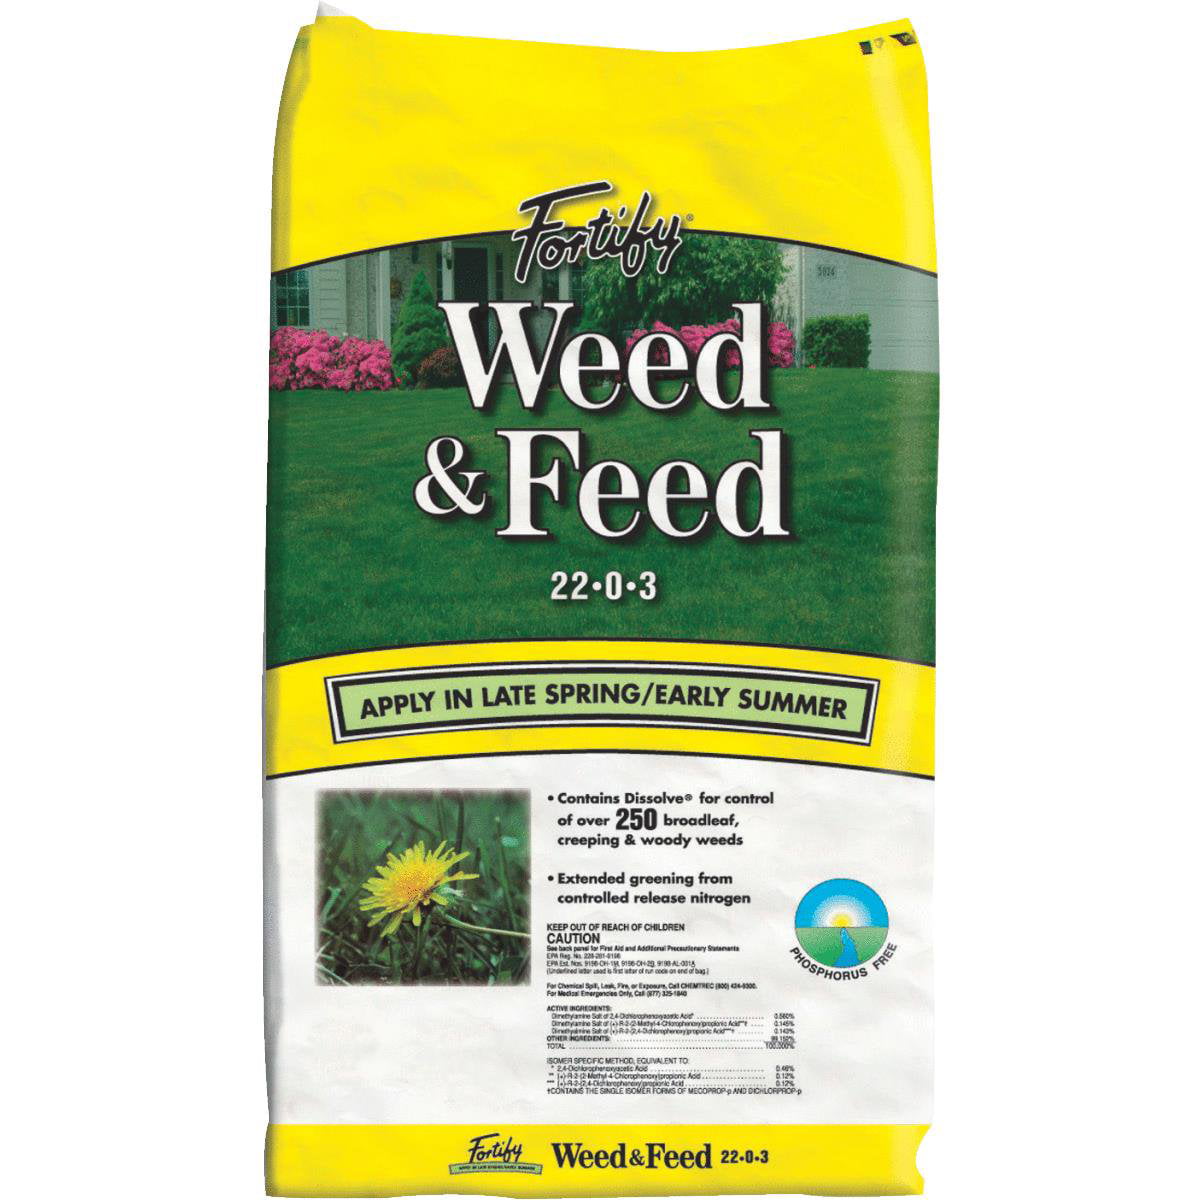 Fortify Weed & Feed Lawn Fertilizer with Weed Killer - Walmart.com